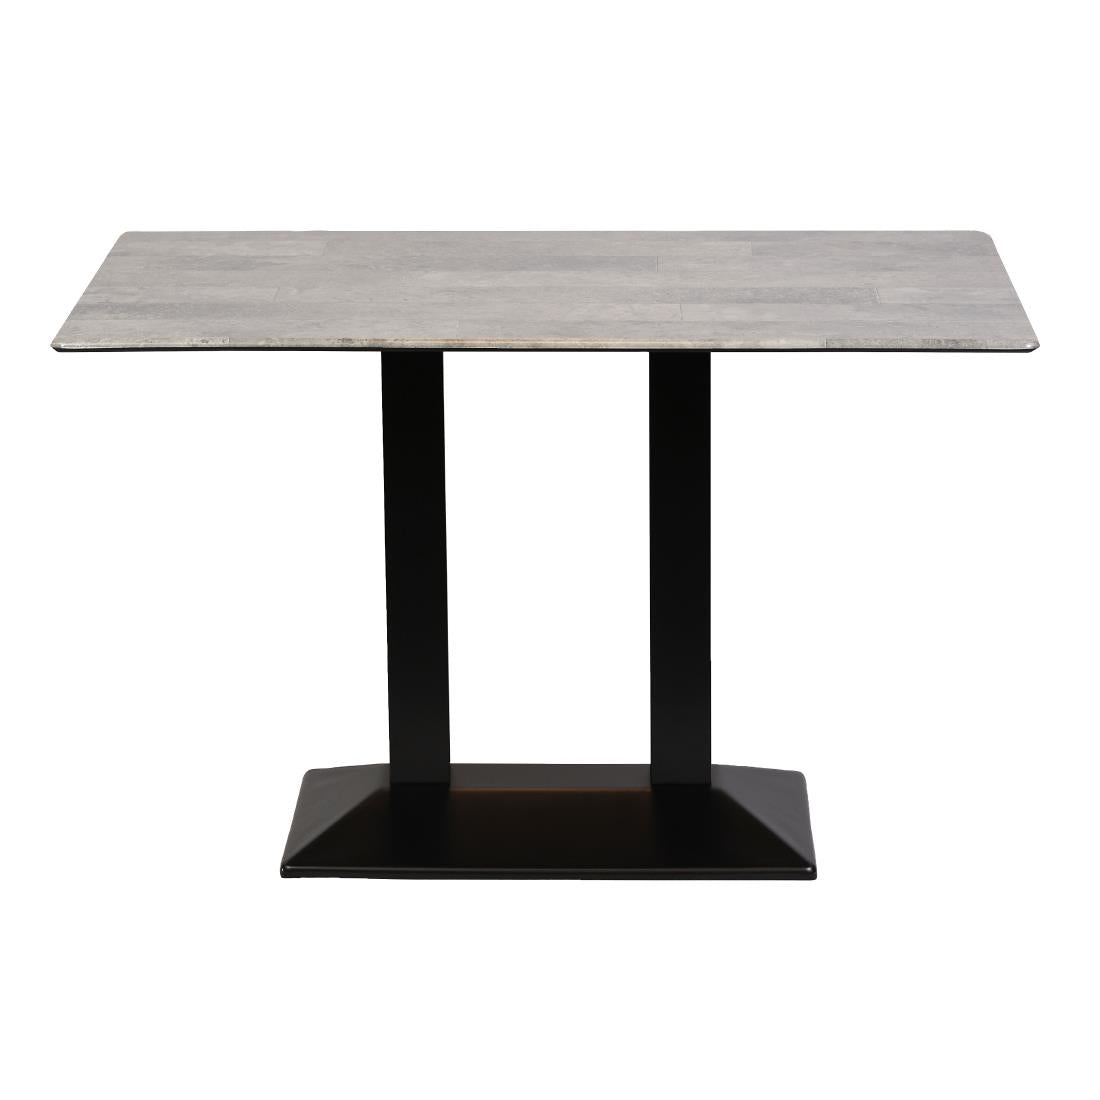 CZ823 Turin Metal Base Rectangular Dining Table with Laminate Top Concrete 1200x700mm JD Catering Equipment Solutions Ltd